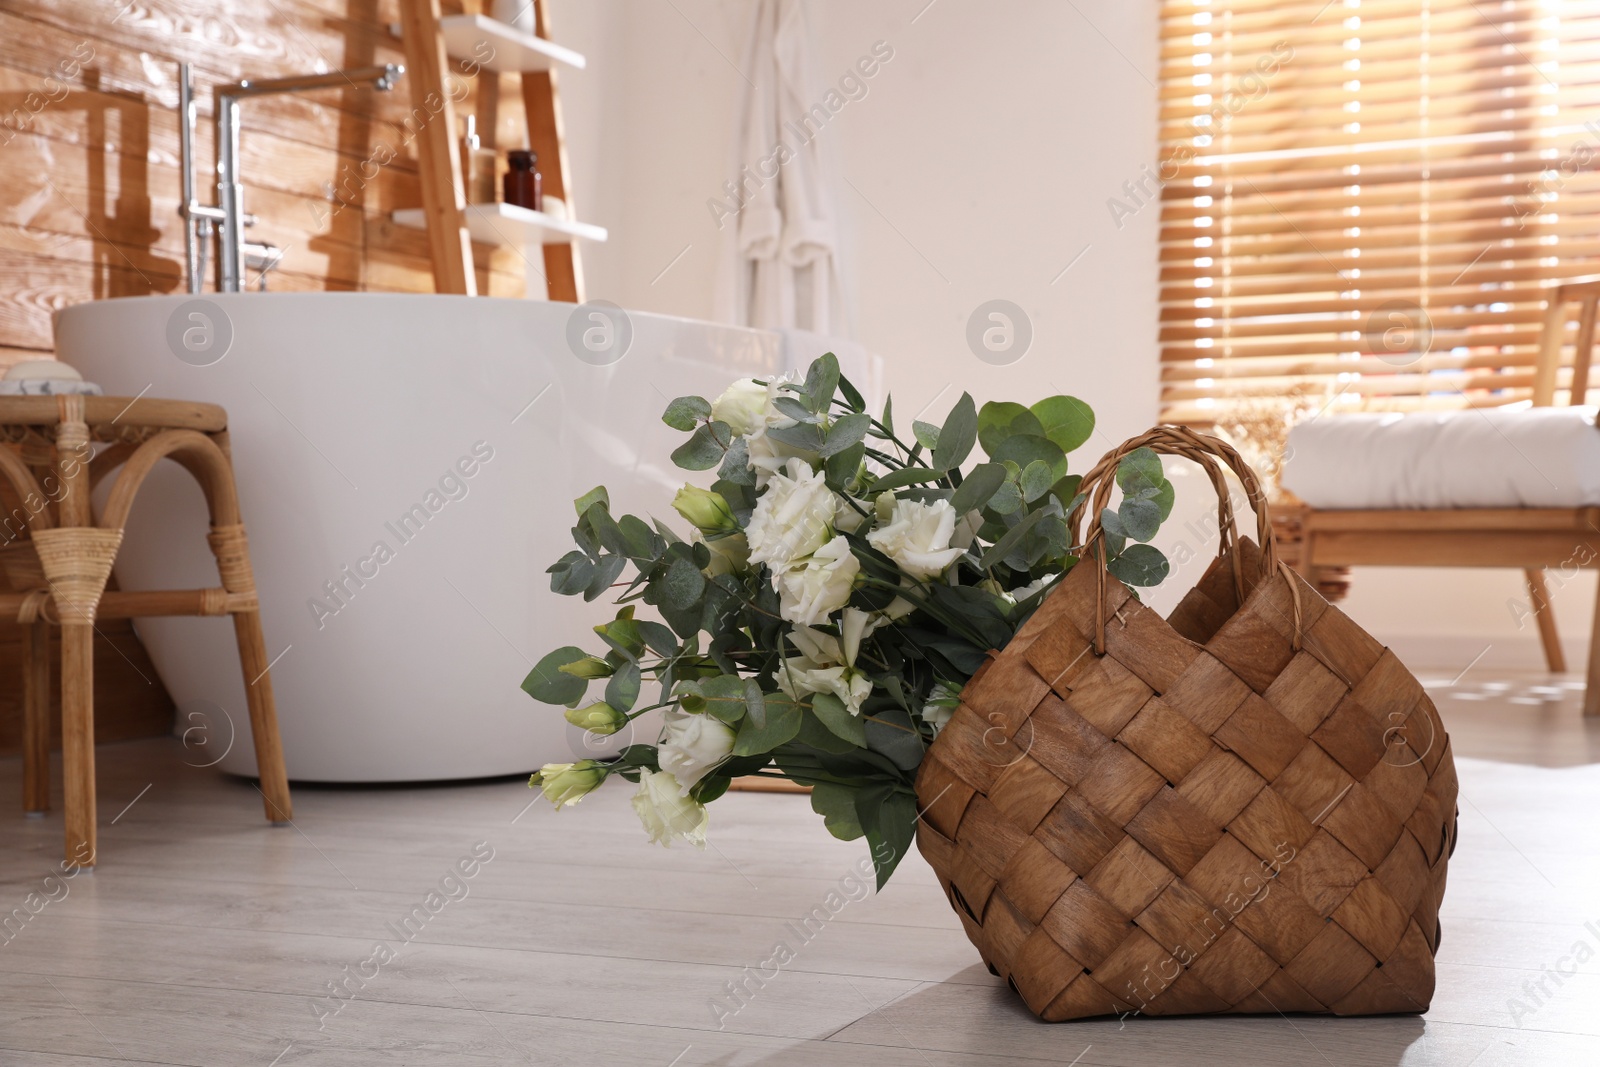 Photo of Stylish wicker basket with fresh eucalyptus branches and flowers on floor in bathroom